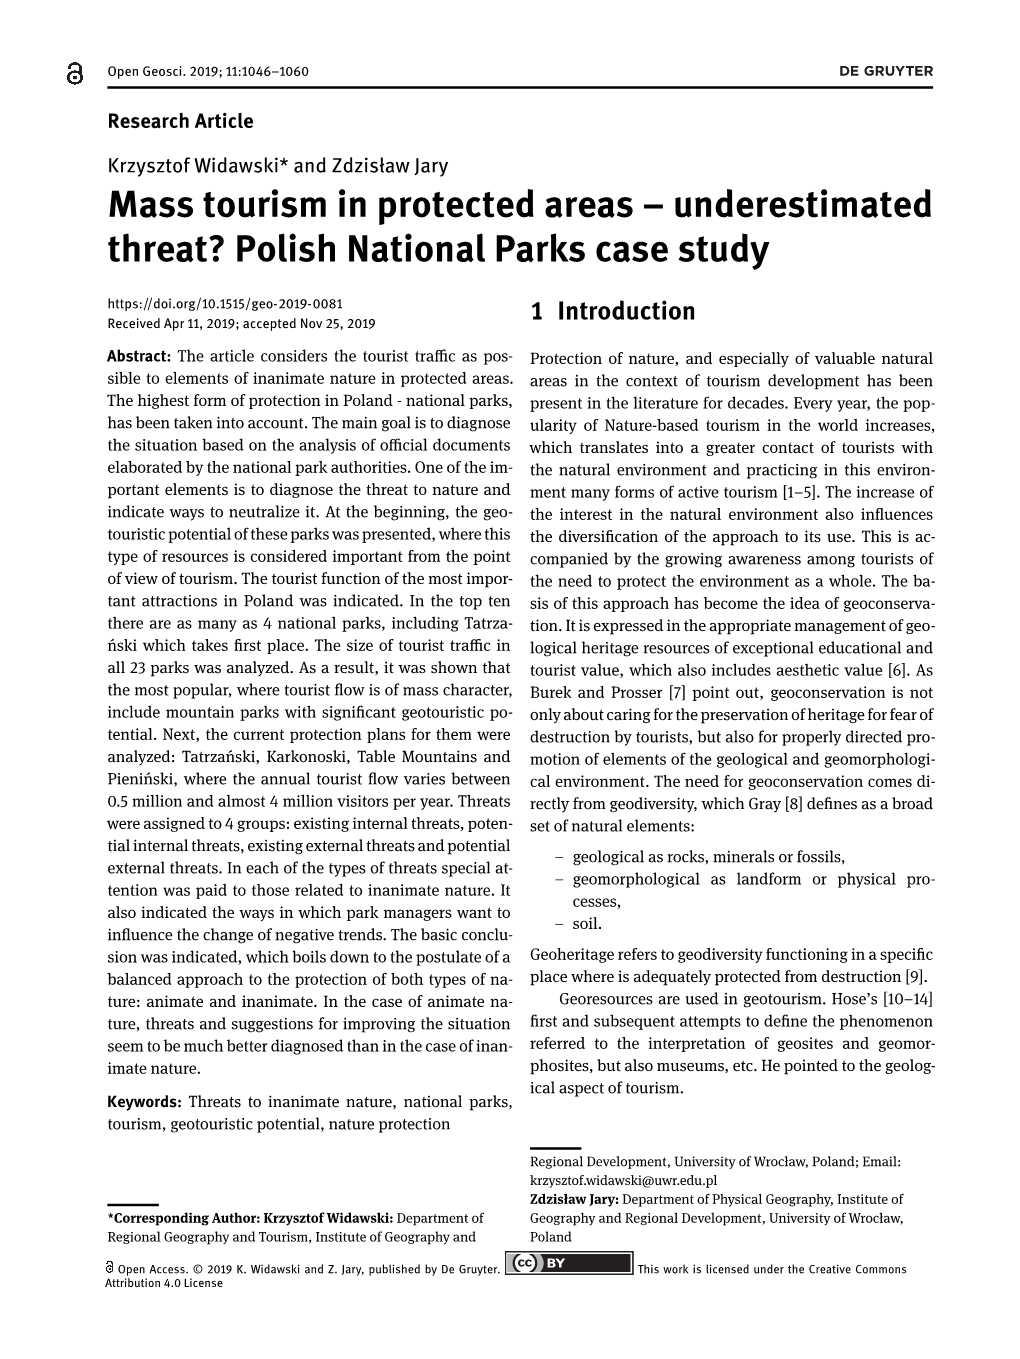 Mass Tourism in Protected Areas – Underestimated Threat?